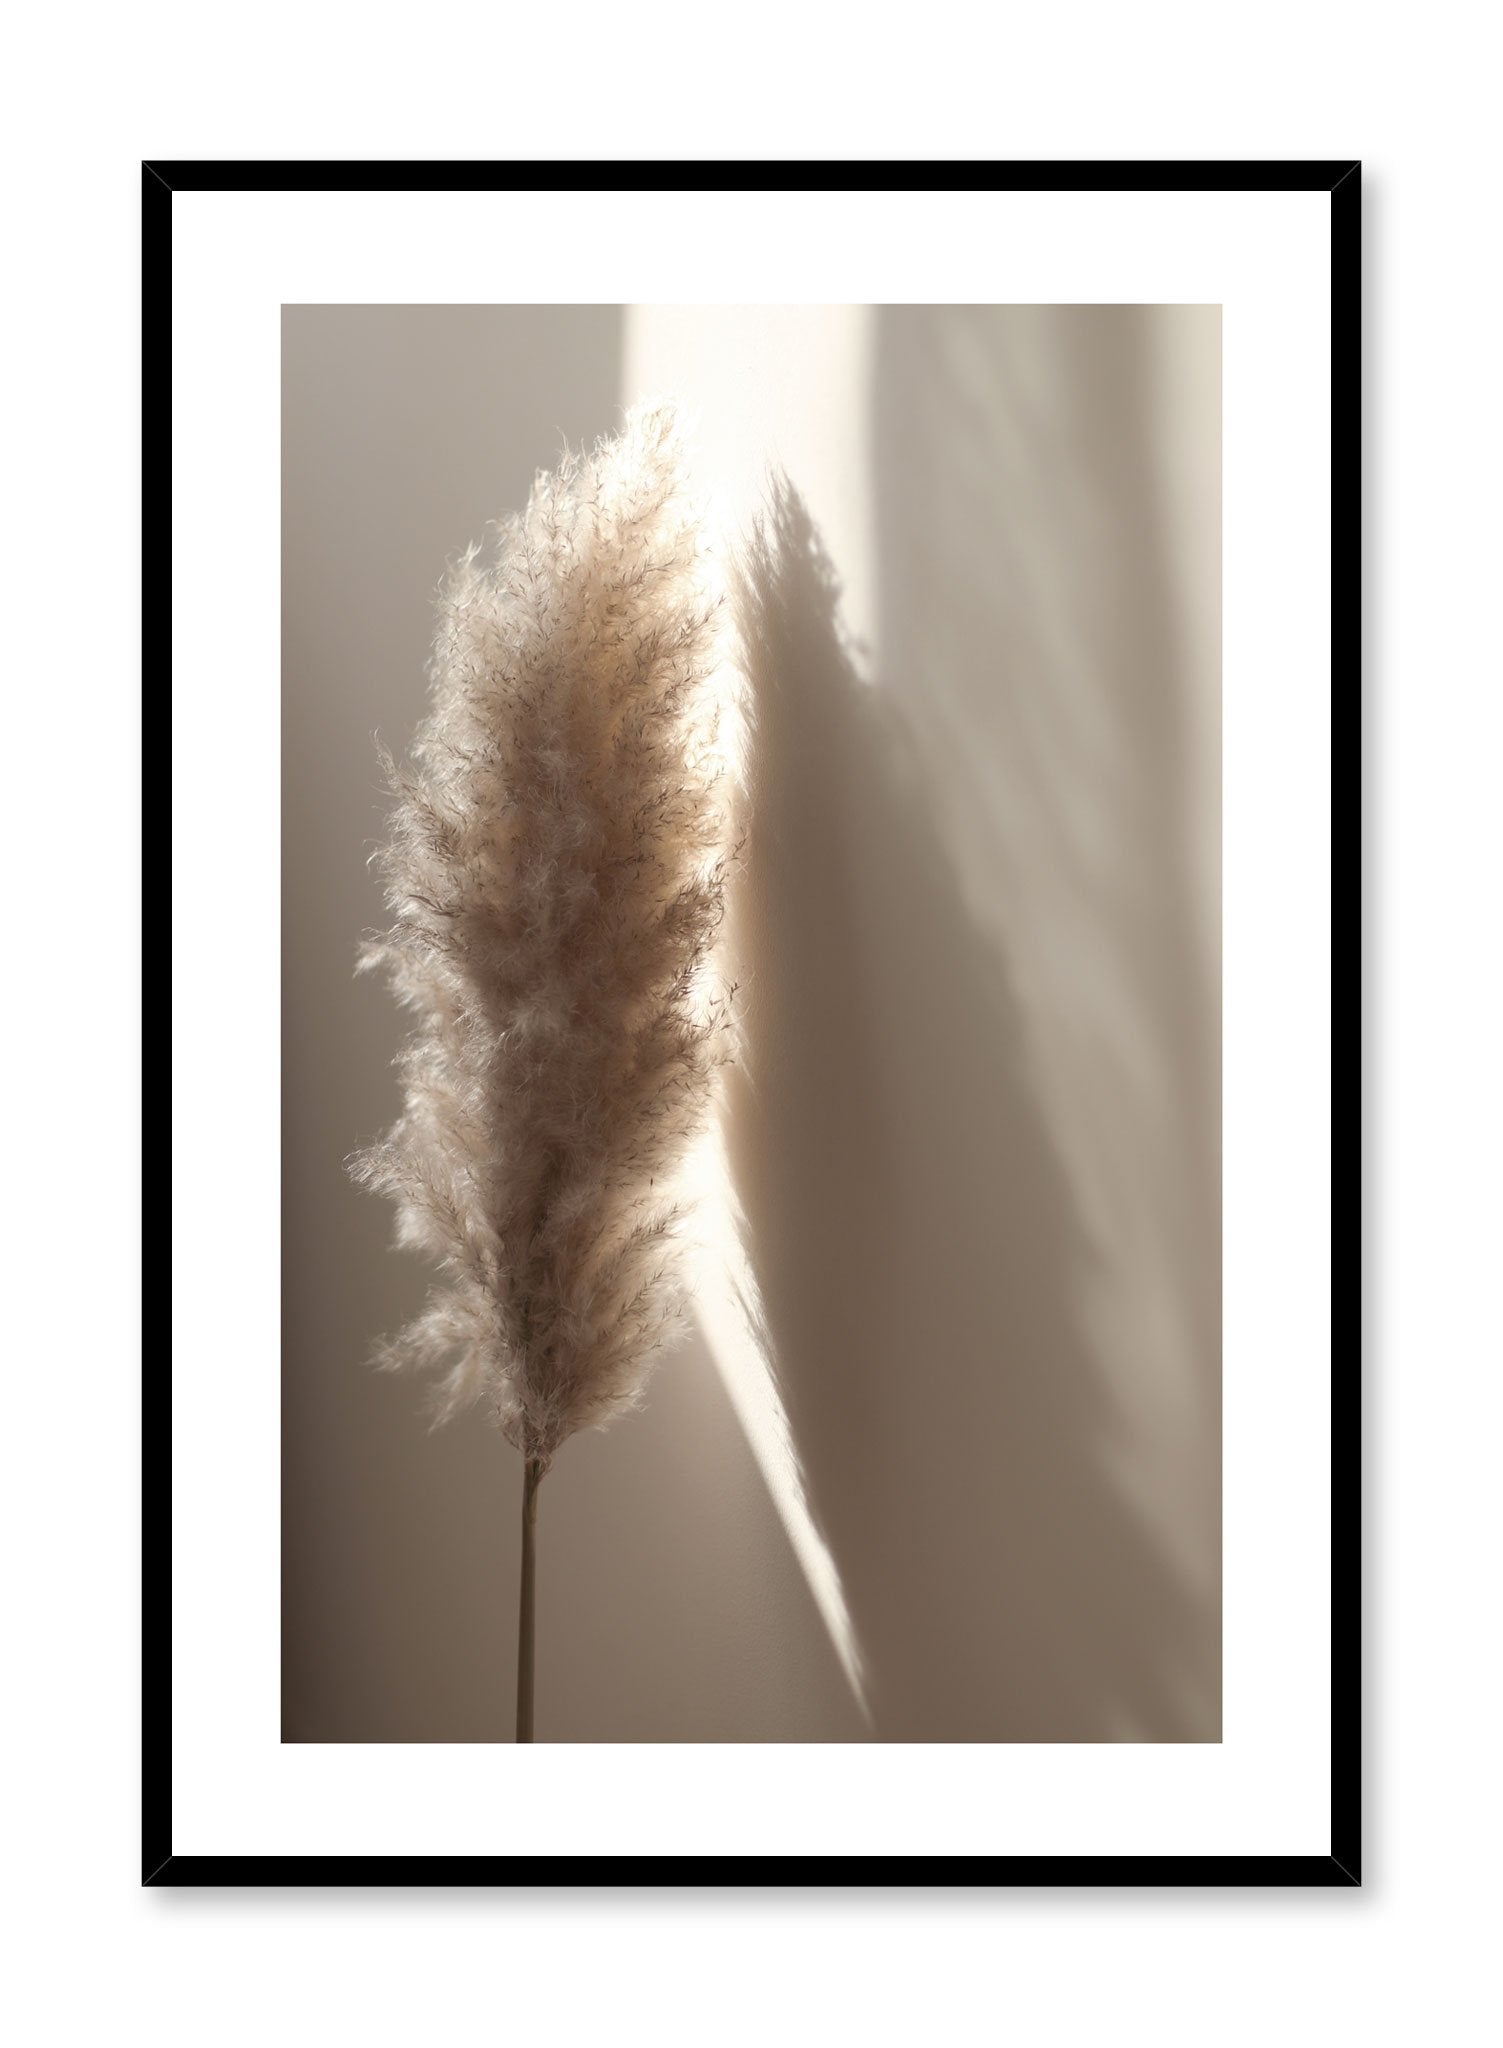 "Sunlit Pampas" is a botanical photography poster by Opposite Wall of a single fluffy sunlit beige pampas over a beige wall.